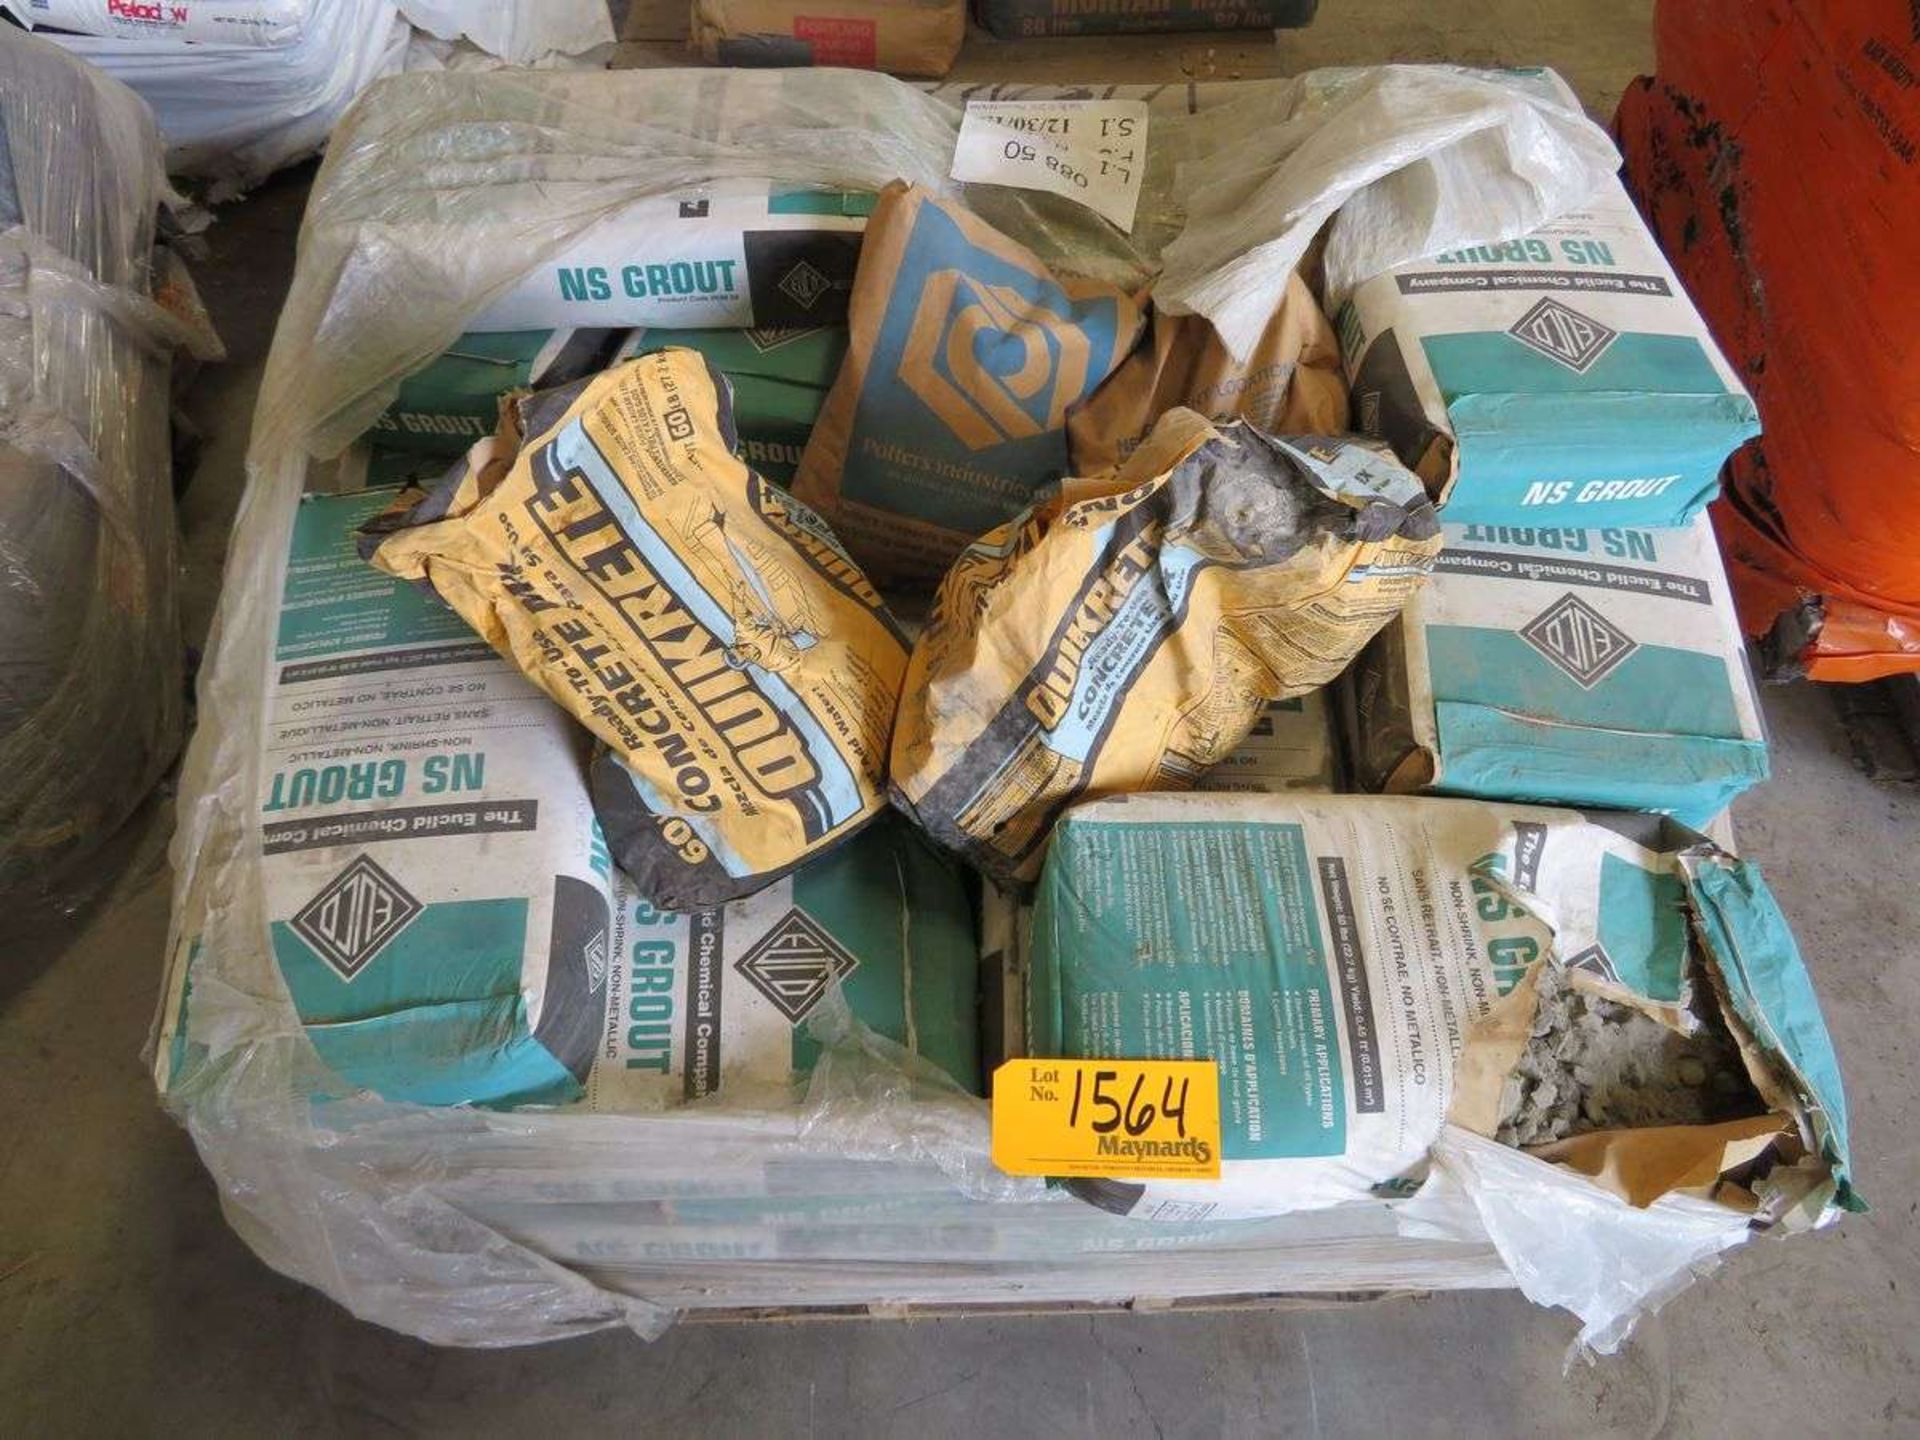 (7) Pallets of Concrete Mix, Grout and Mortar